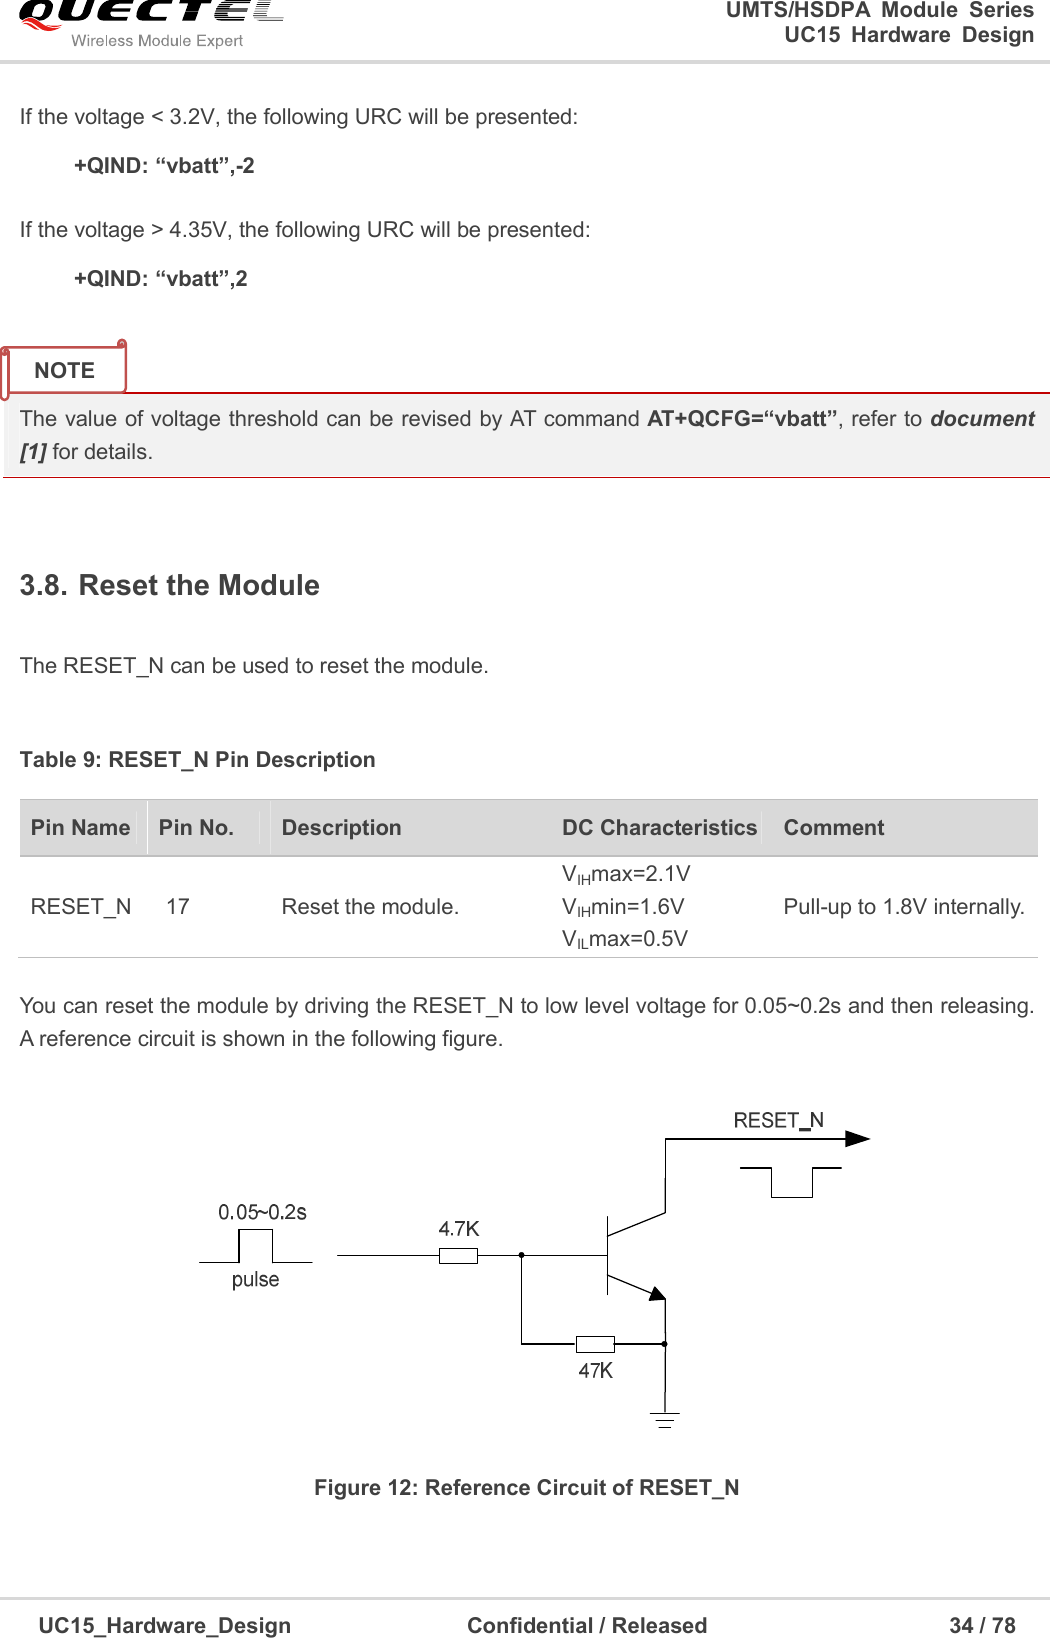                                                                        UMTS/HSDPA  Module  Series                                                                 UC15 Hardware Design  UC15_Hardware_Design                                Confidential / Released                                            34 / 78    If the voltage &lt; 3.2V, the following URC will be presented:     +QIND: “vbatt”,-2  If the voltage &gt; 4.35V, the following URC will be presented:     +QIND: “vbatt”,2   The value of voltage threshold can be revised by AT command AT+QCFG=“vbatt”, refer to document [1] for details.  3.8. Reset the Module  The RESET_N can be used to reset the module.  Table 9: RESET_N Pin Description  You can reset the module by driving the RESET_N to low level voltage for 0.05~0.2s and then releasing. A reference circuit is shown in the following figure.  Figure 12: Reference Circuit of RESET_N    Pin Name  Pin No.  Description  DC Characteristics Comment RESET_N  17  Reset the module. VIHmax=2.1V VIHmin=1.6V VILmax=0.5V Pull-up to 1.8V internally.  NOTE 